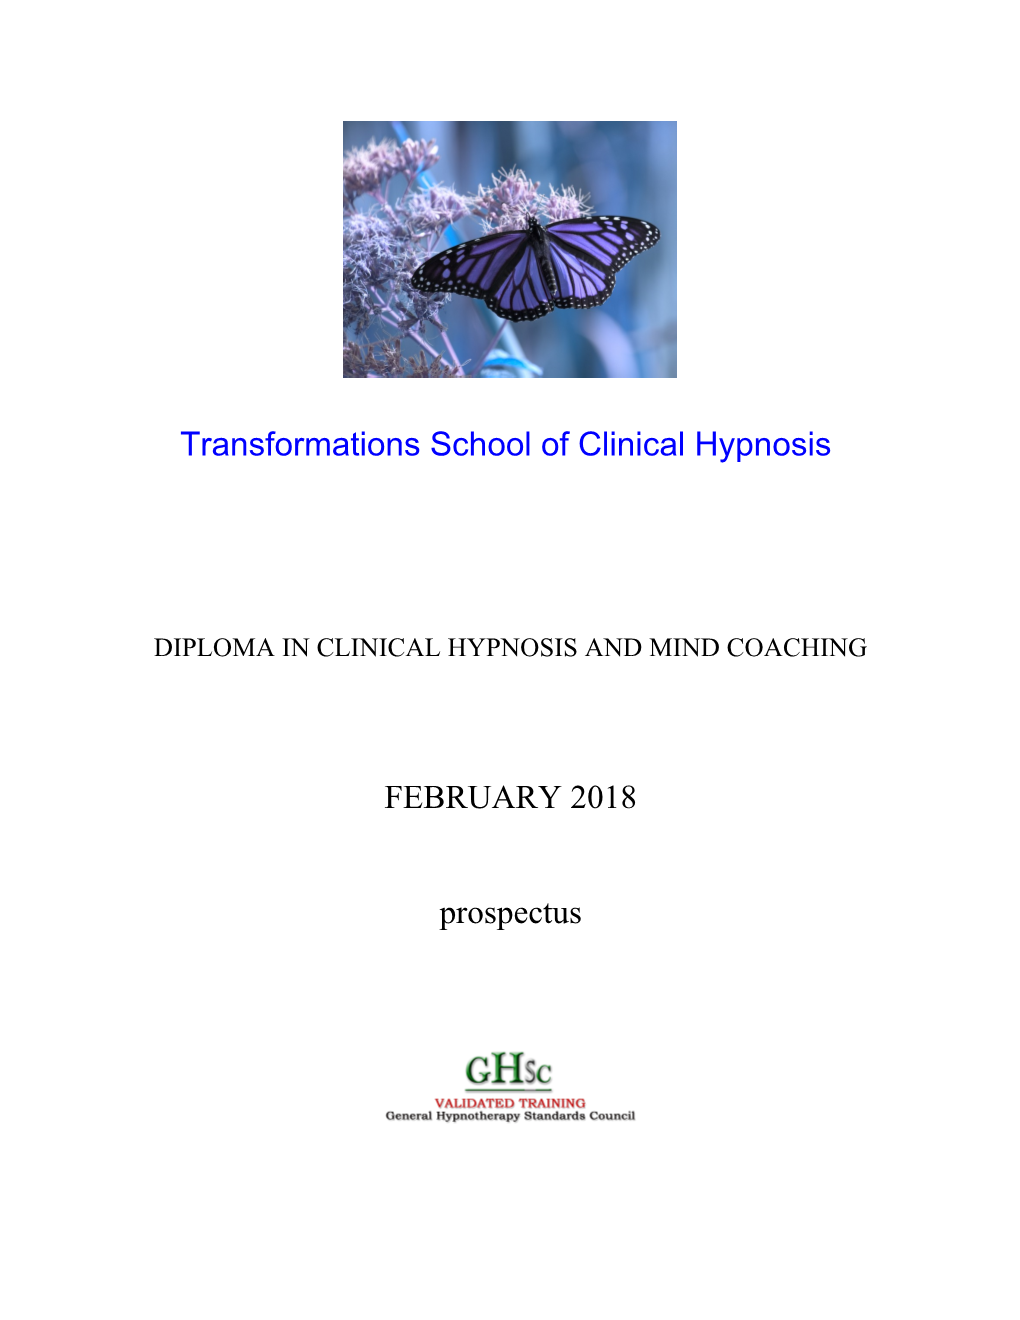 Transformations School of Clinical Hypnosis